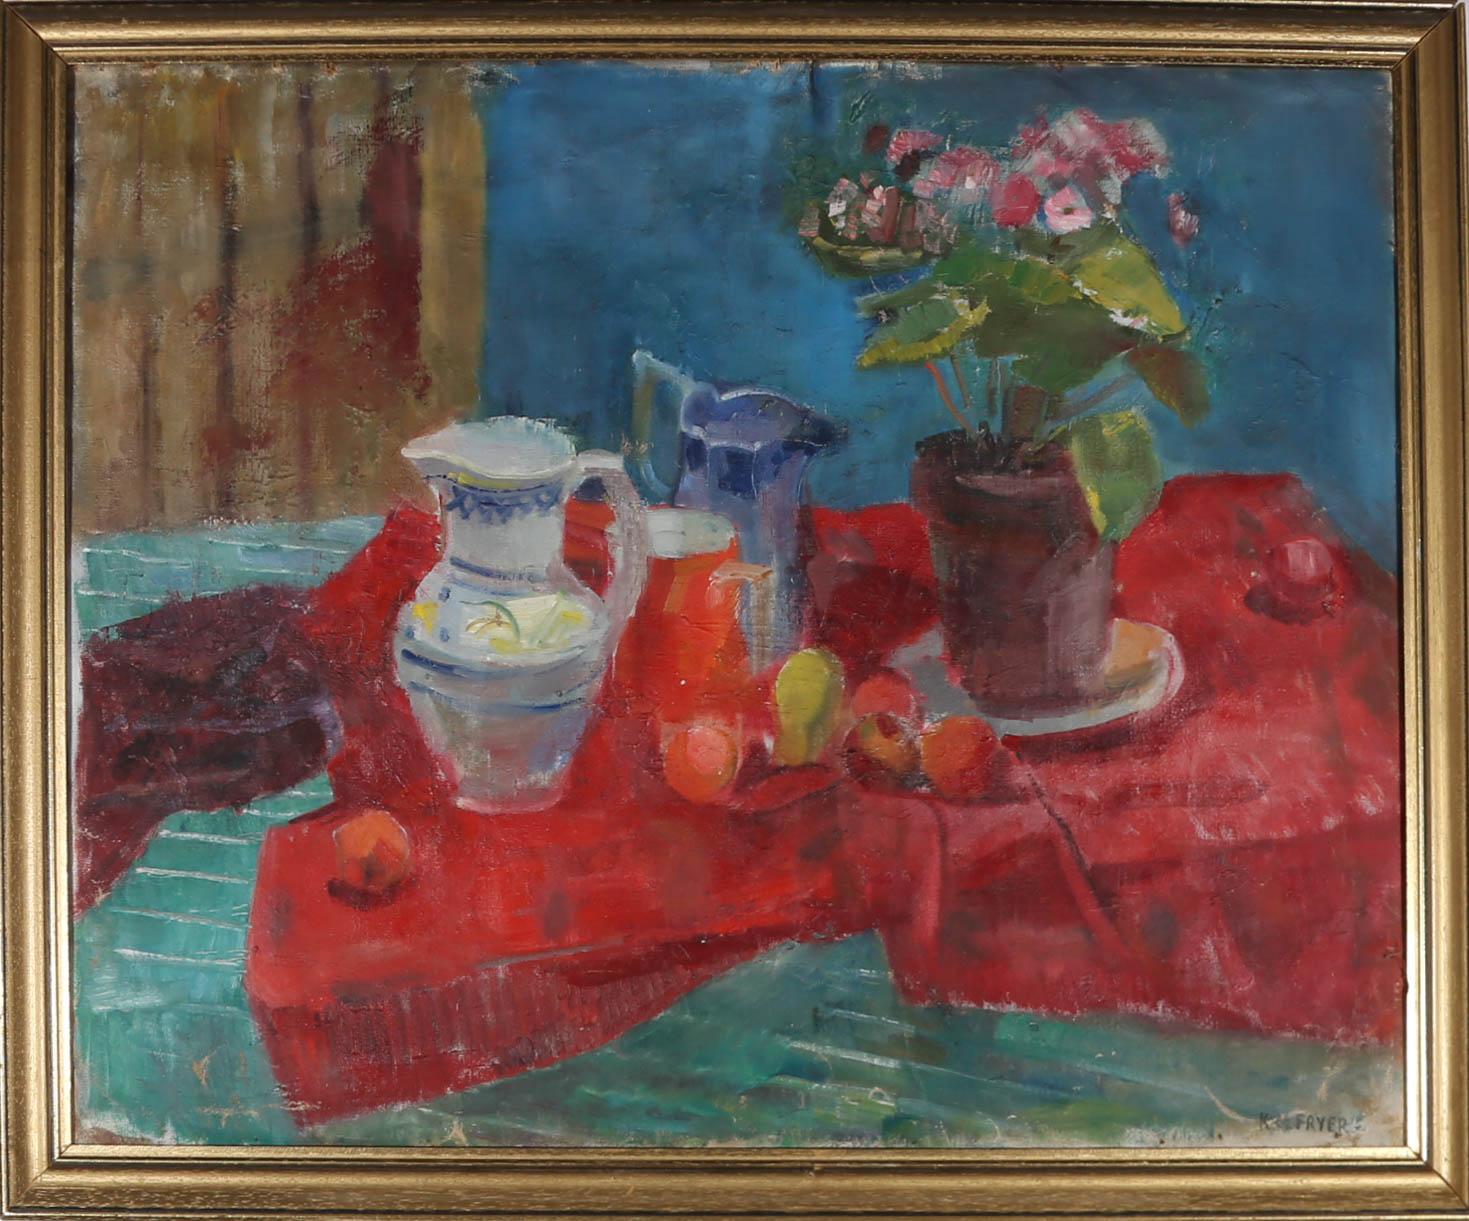 This energetically painted still life shows a colourful collection of ceramic jugs, group together alongside a potted house plant and orchard fruits. The artist has signed the artwork to the lower right-hand corner, and the oil has been well